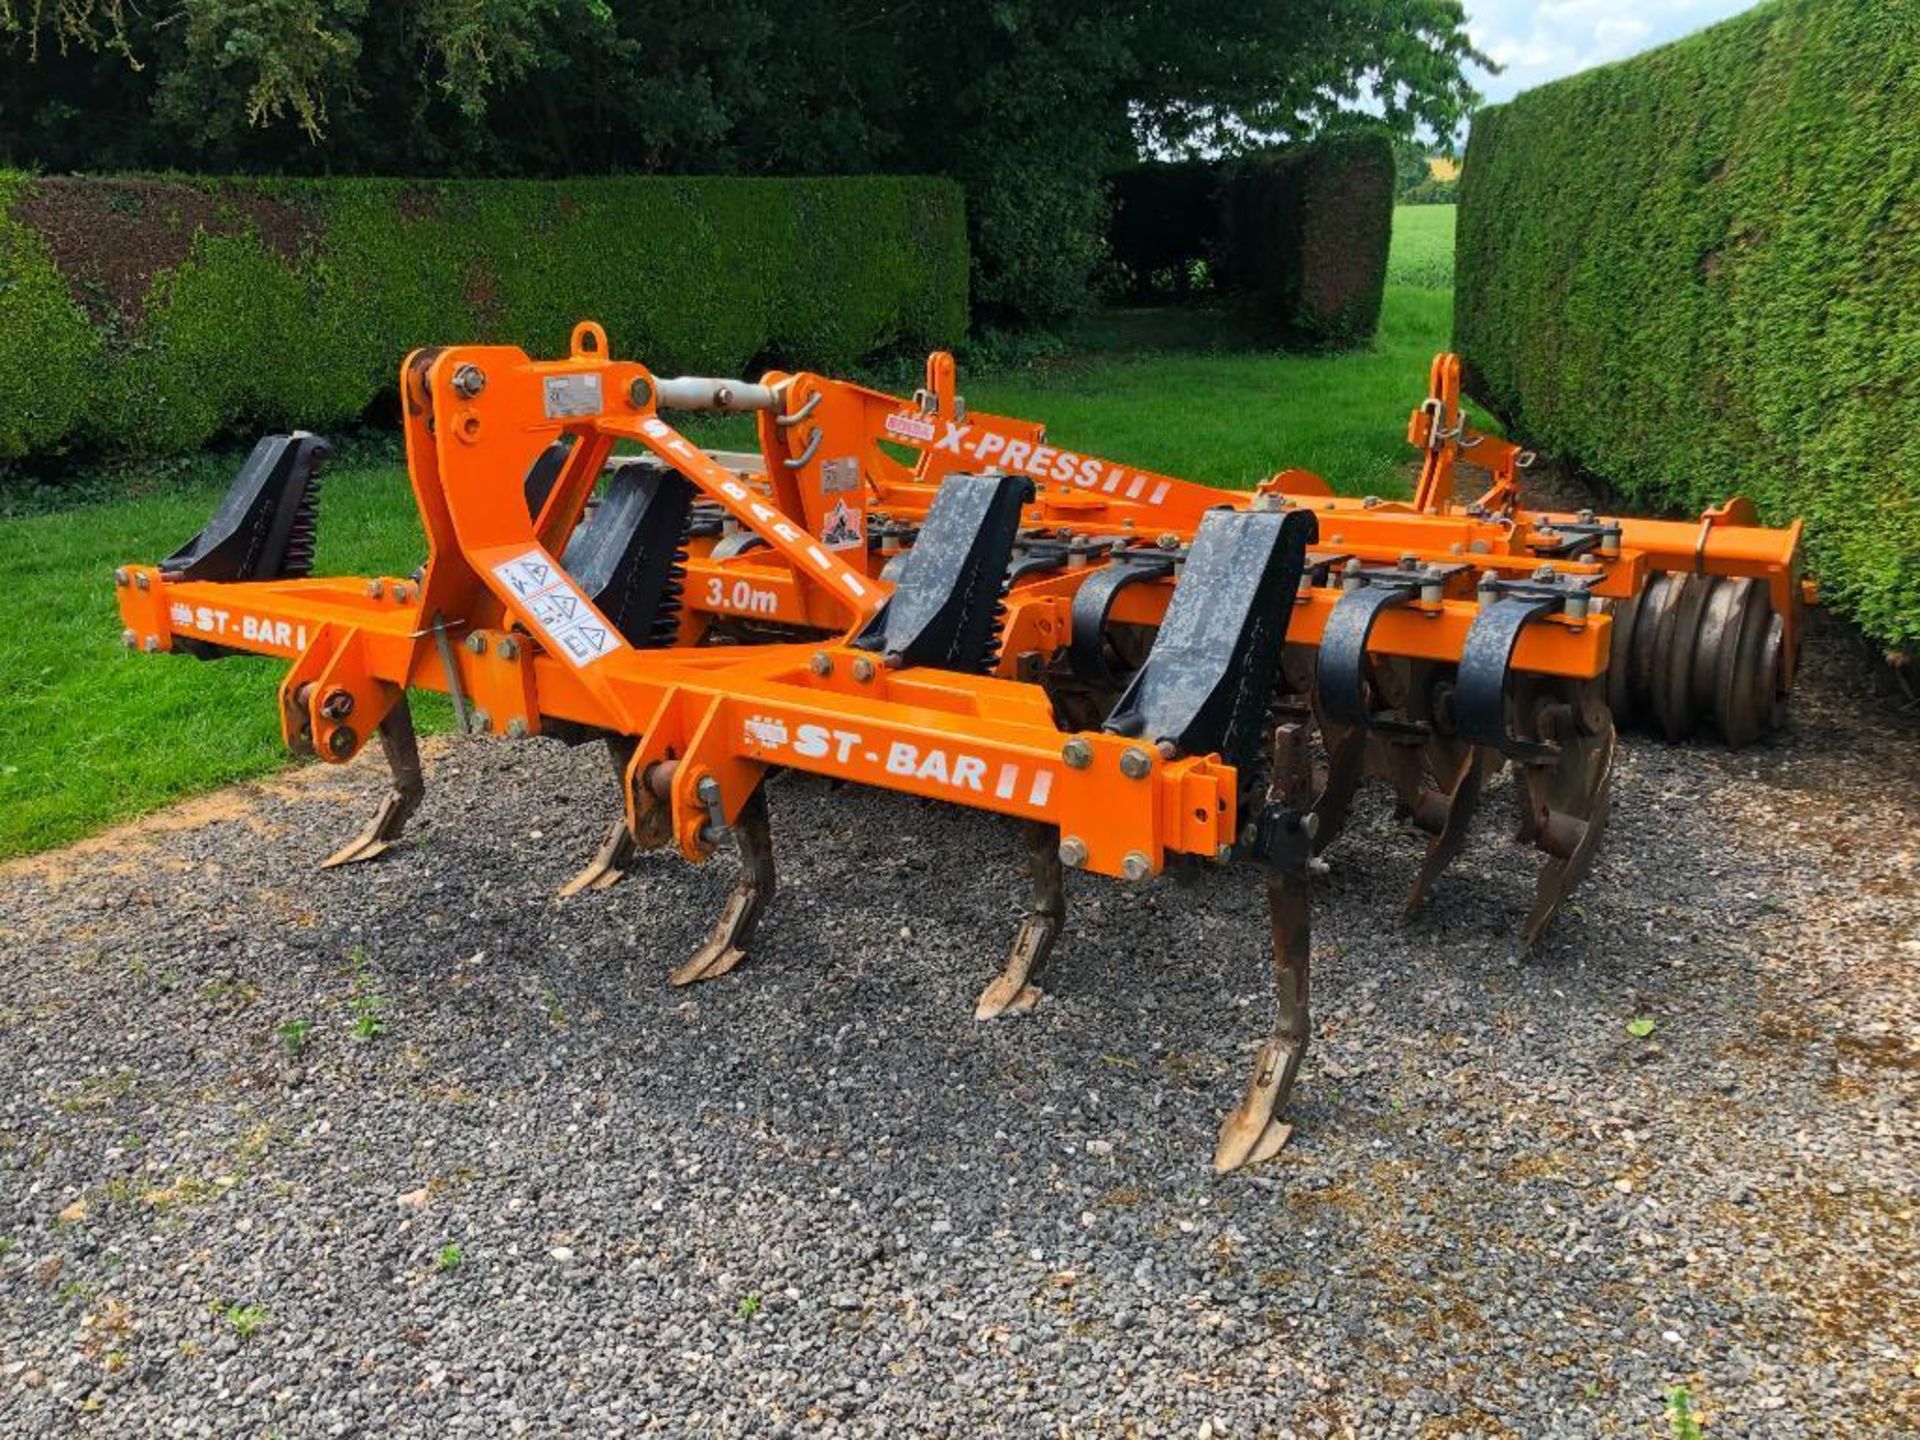 2008 Simba X-Press 3m with Simba ST bar, 2 rows of discs and DD light packer. X-Press Serial No: 180 - Image 10 of 15